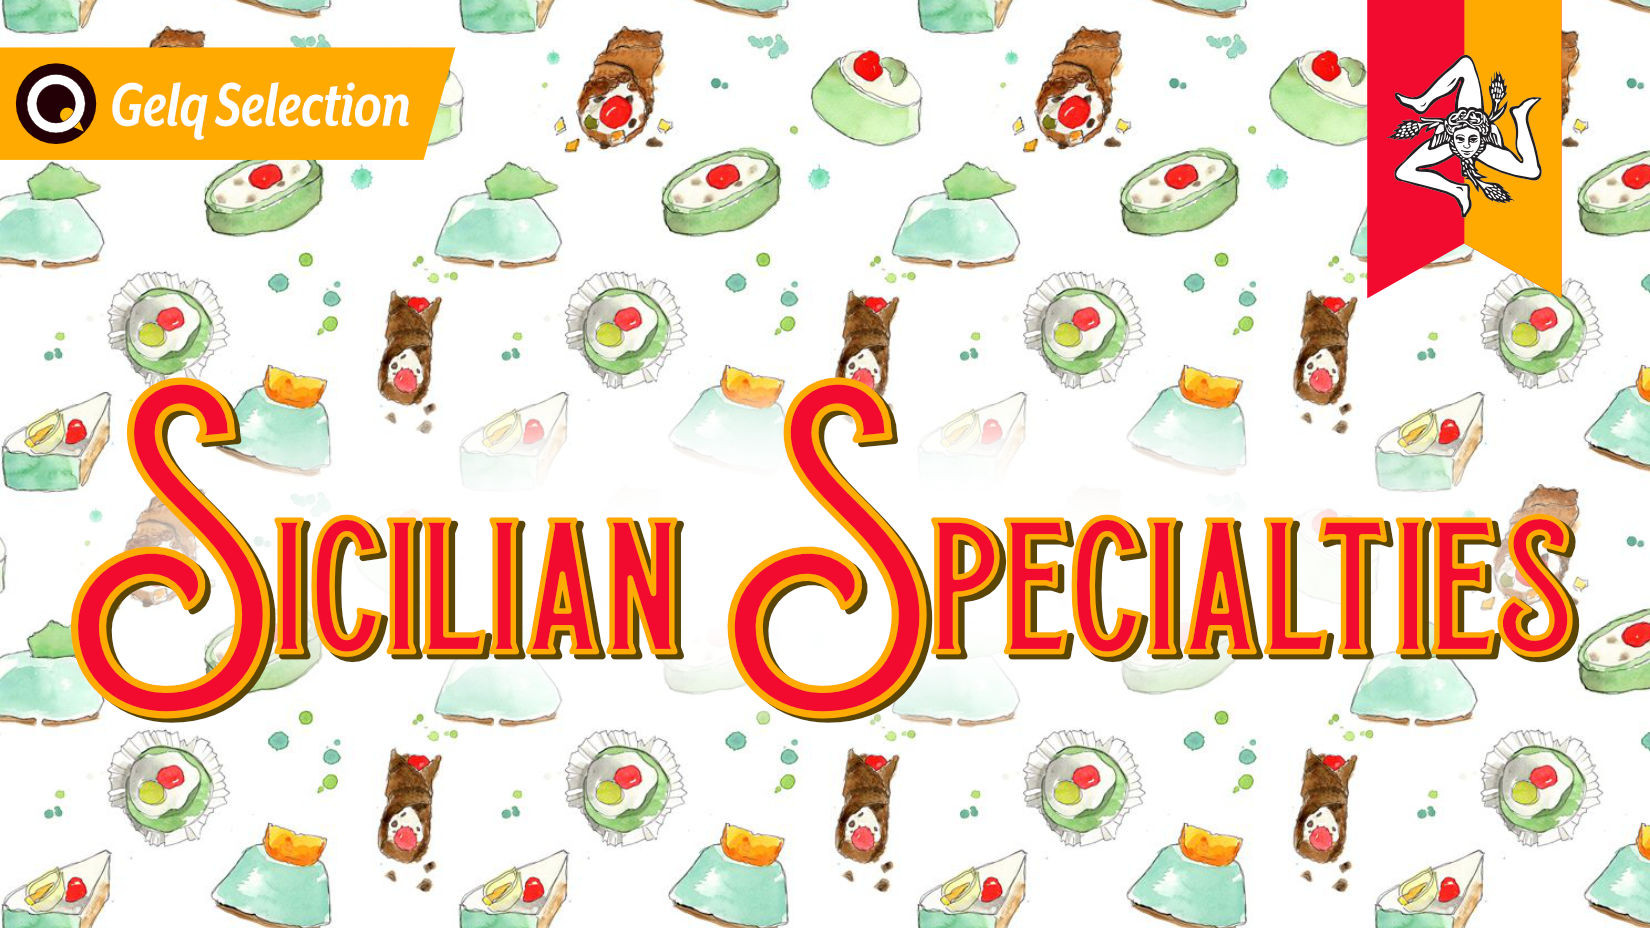 Sicilian specialties in ice cream and pastry.